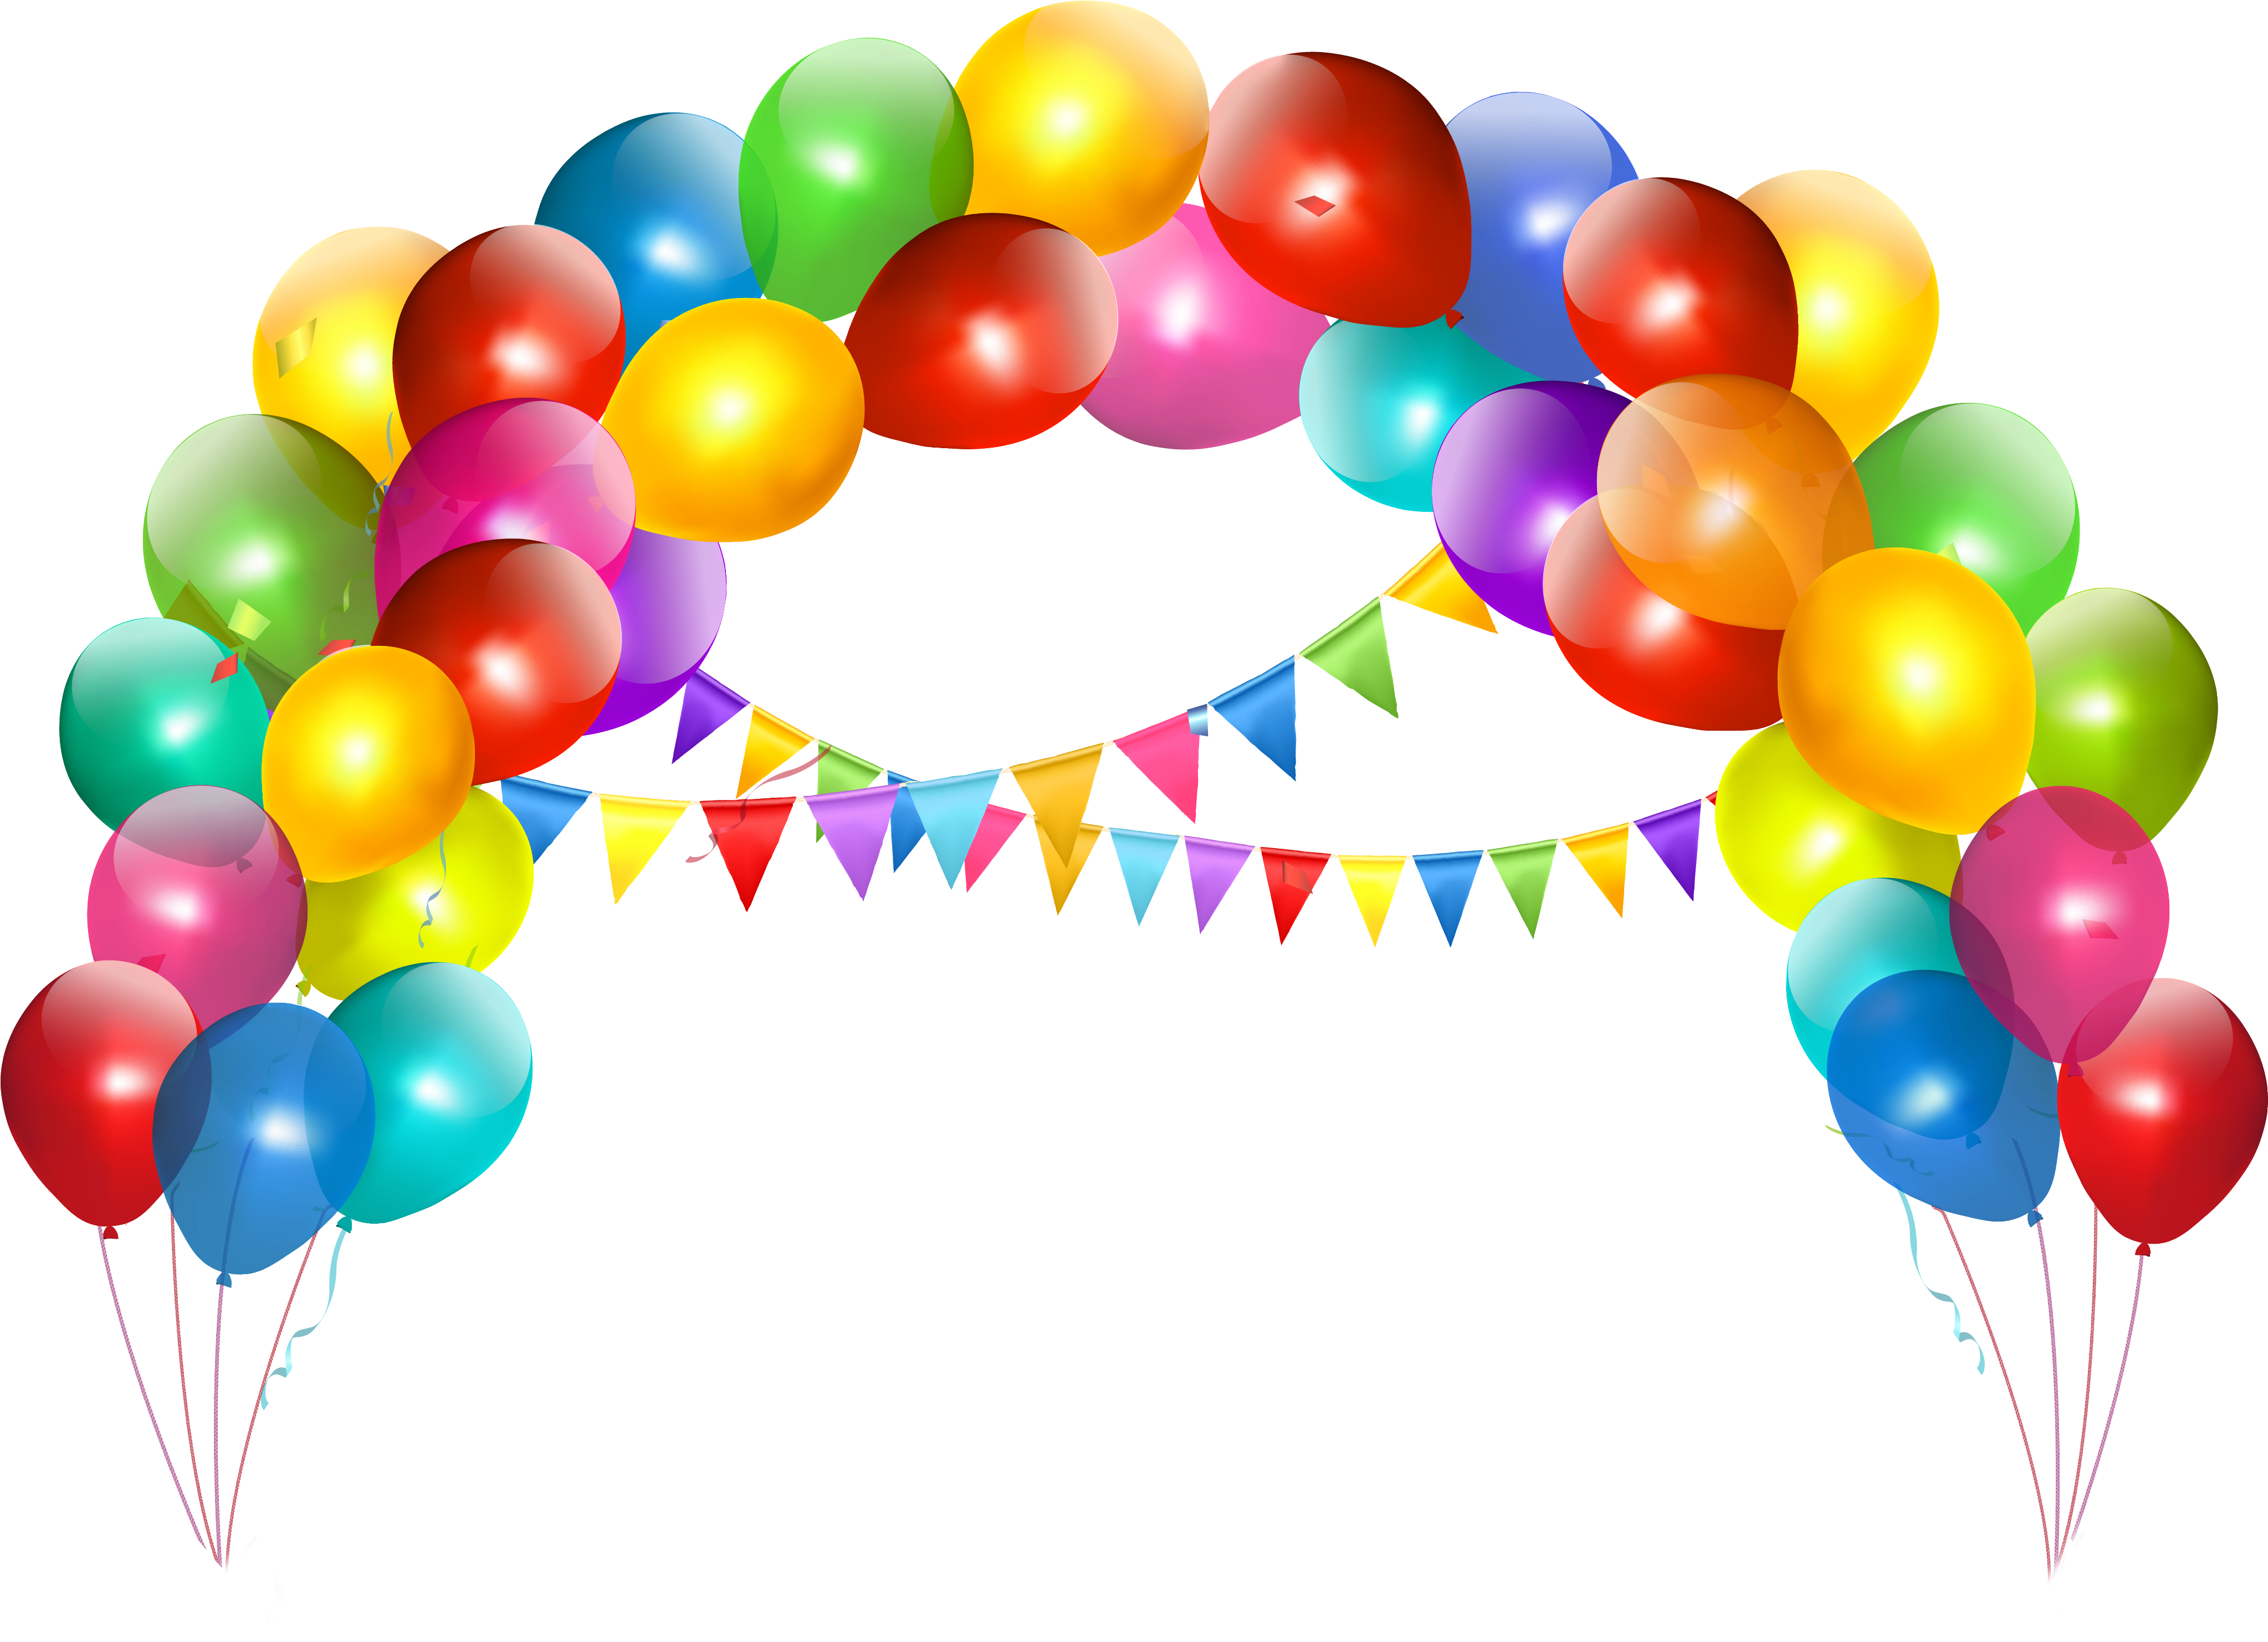 Free Balloons Clip Art - Thank You Everyone For The Birthday Wishes (4405x3172)